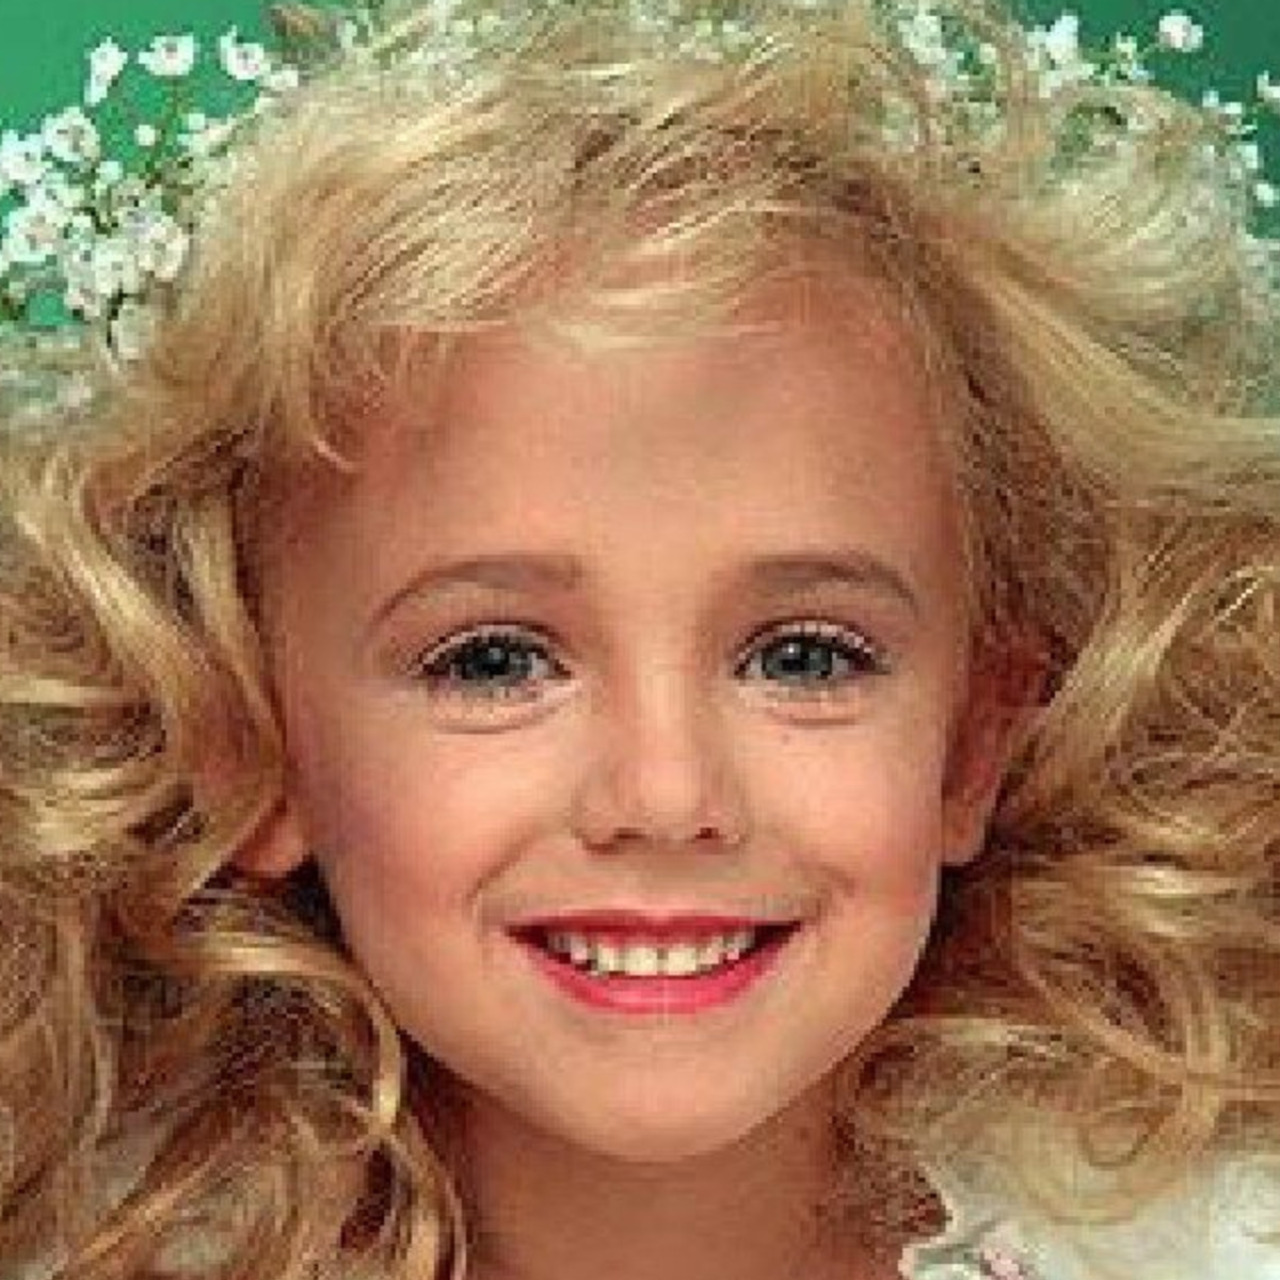 [IMAGE] Family of JonBenét Ramsey petitions Polis for access to DNA evidence